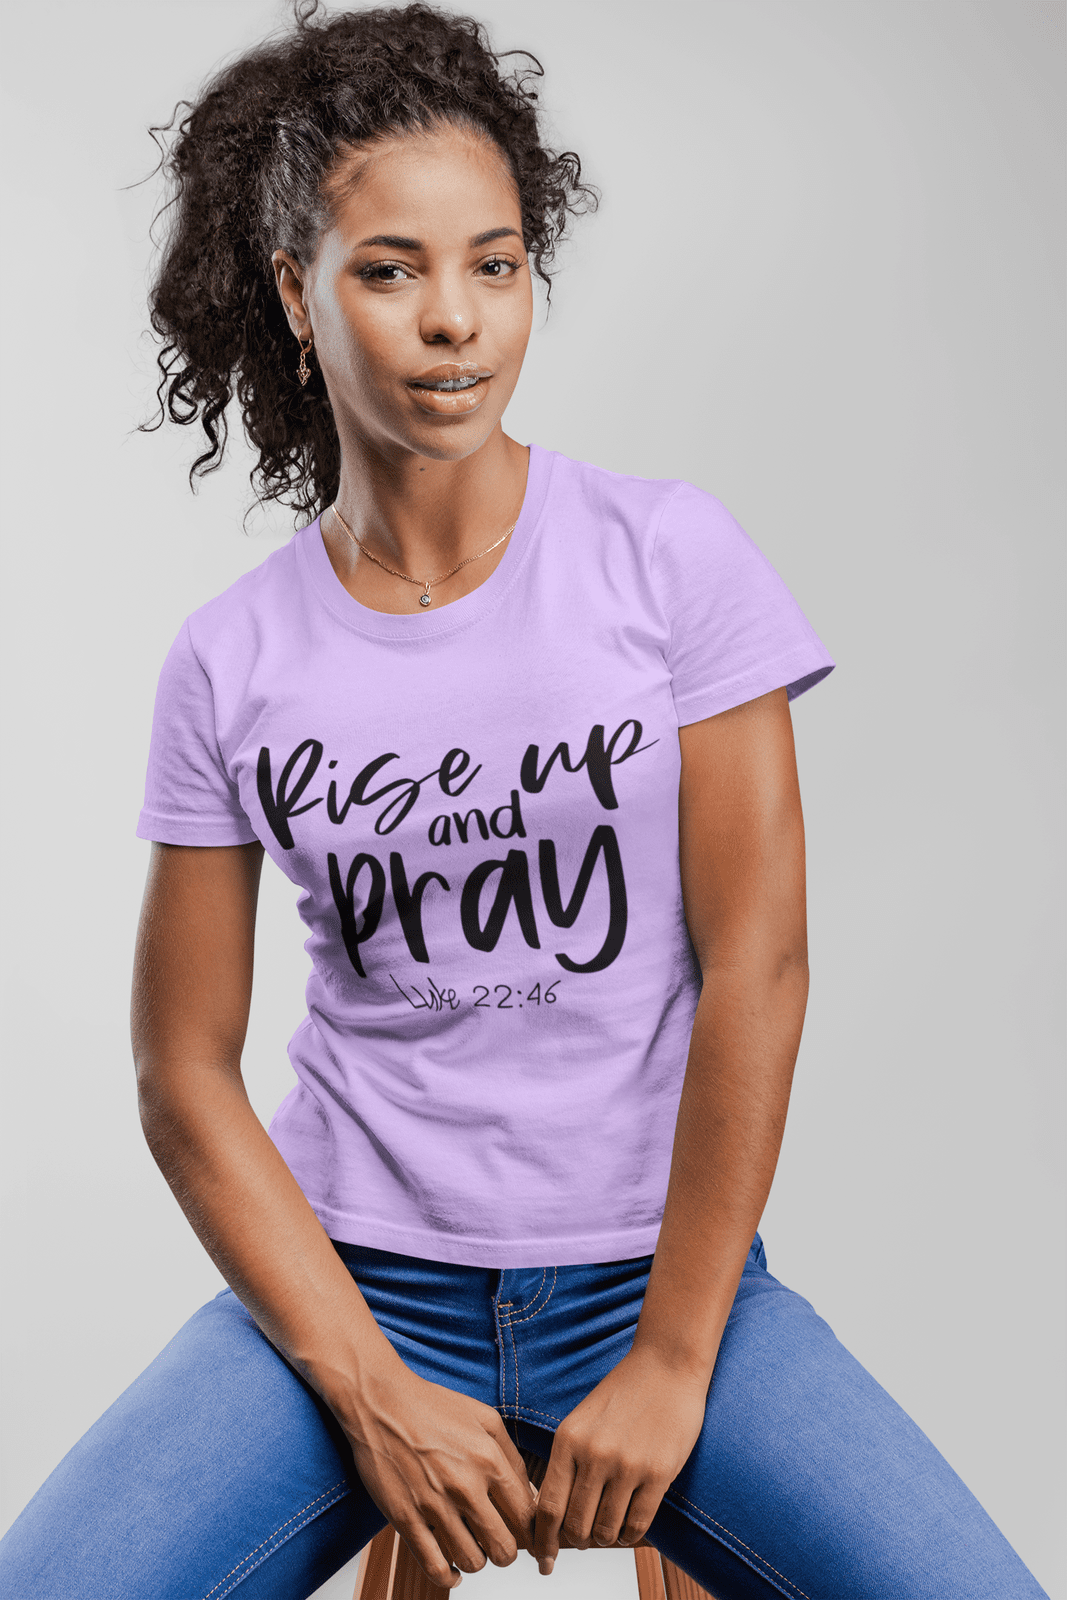 Rise Up And Pray T-Shirt